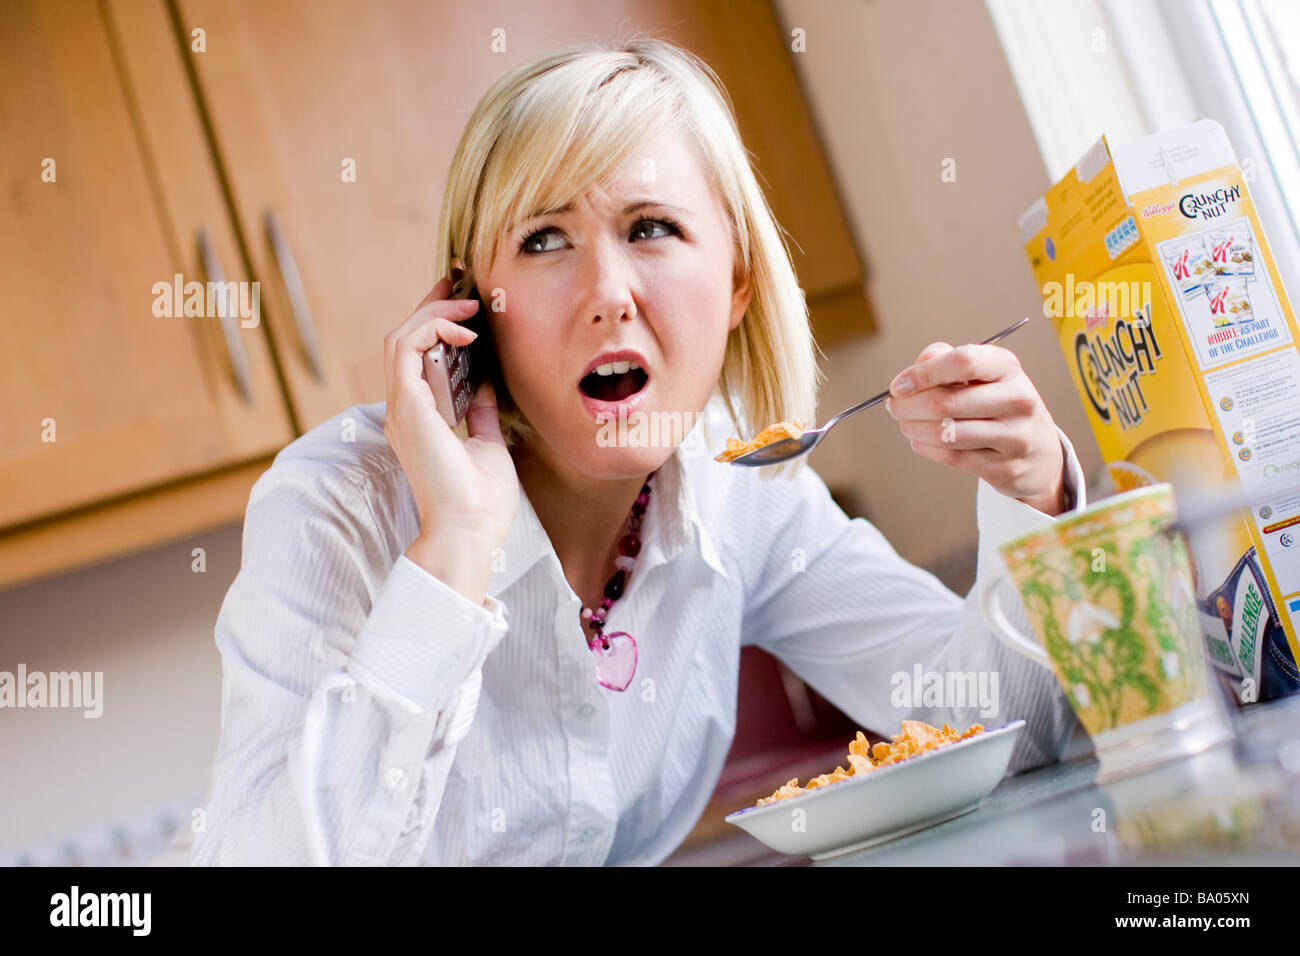 Woman stressed talking on mobile phone Stock Photo